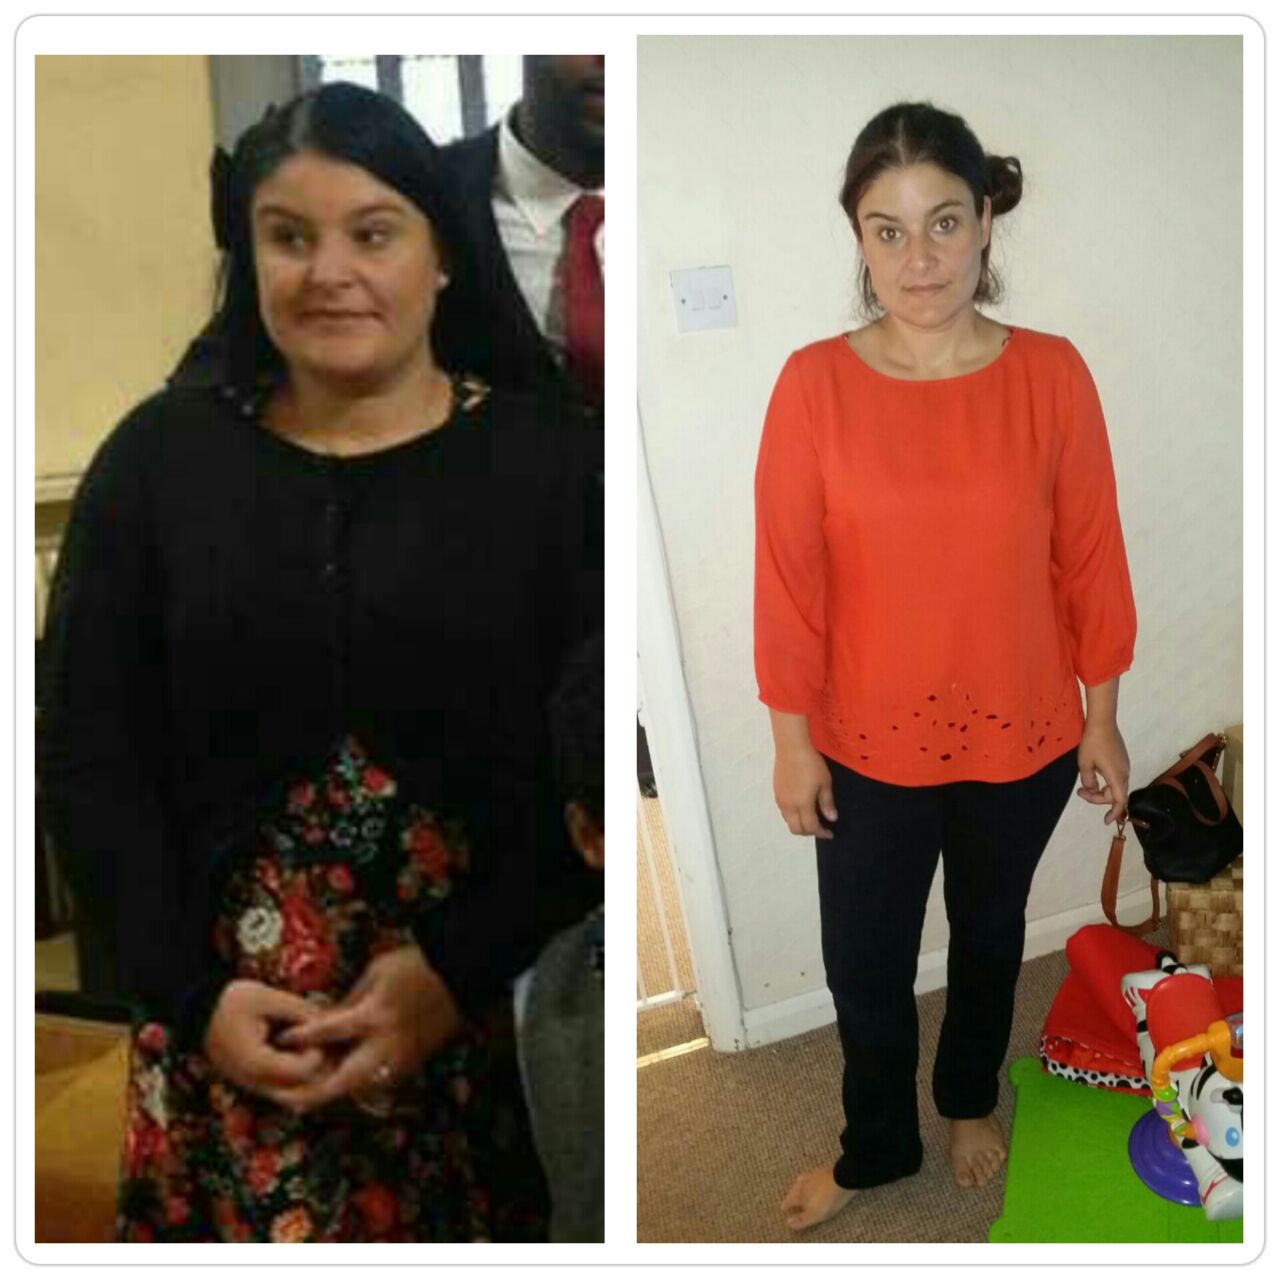 Aimee's Weight Loss Story